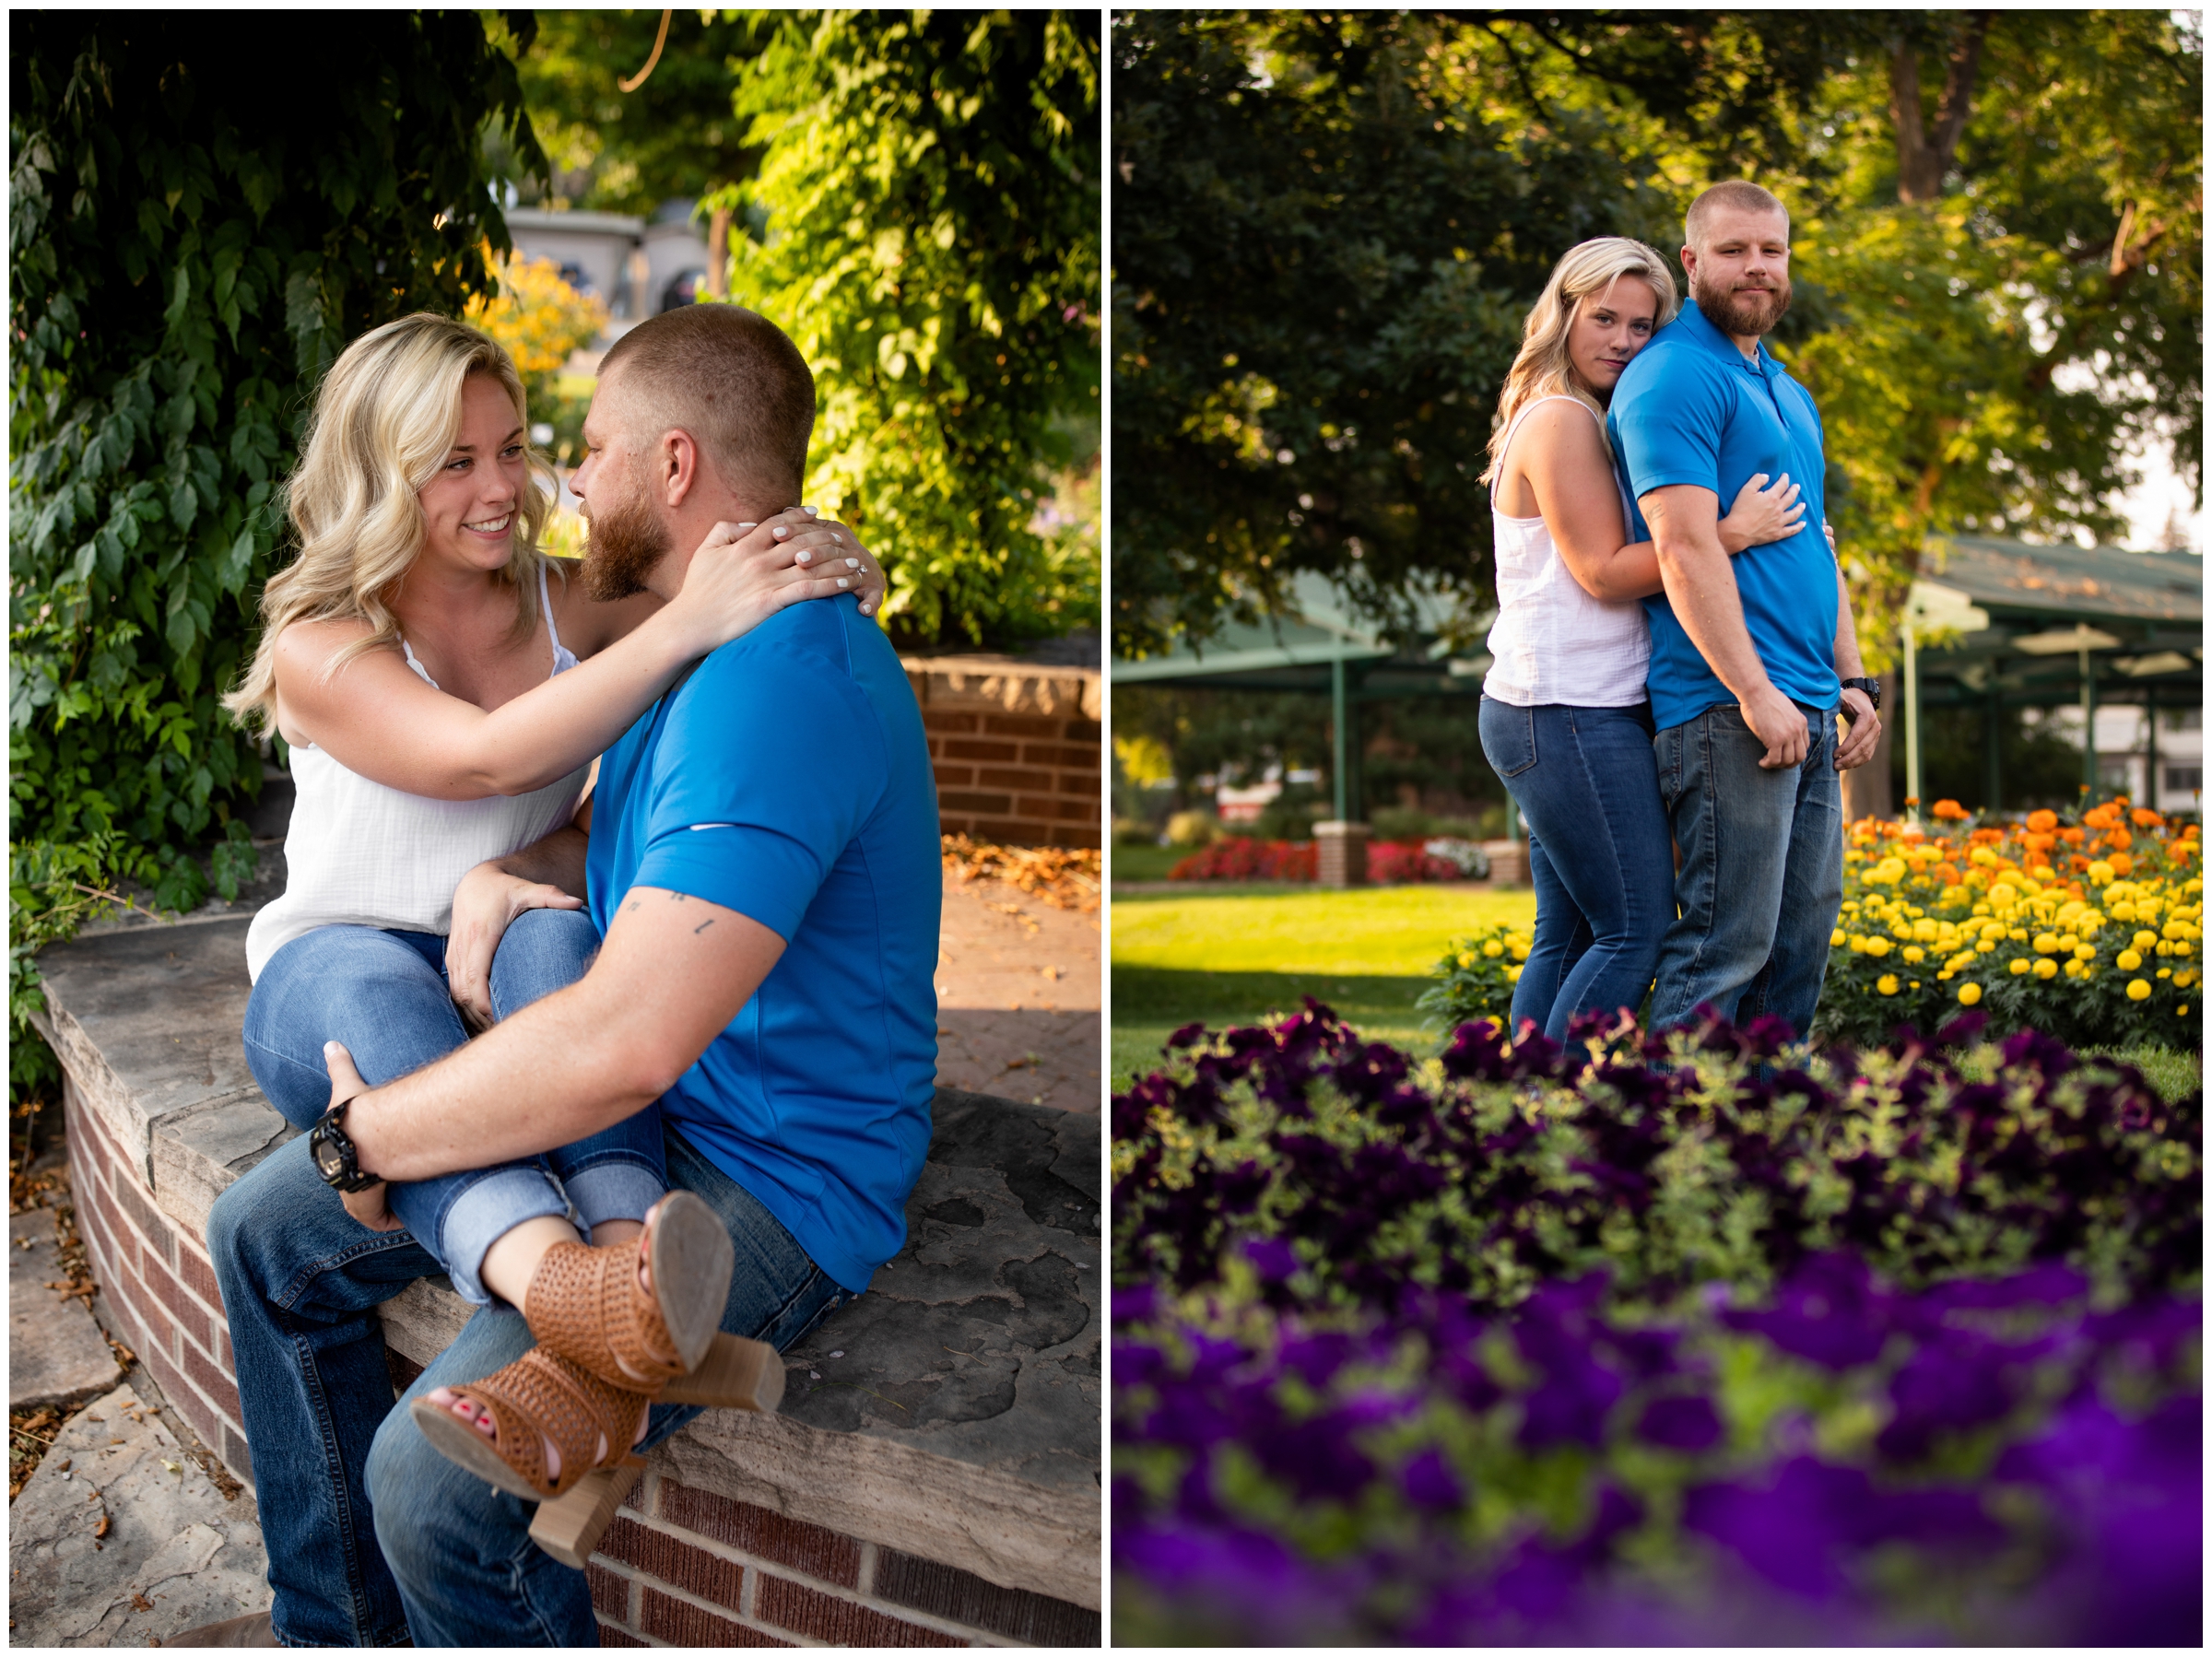 garden engagement photography inspiration by Plum Pretty Photography 